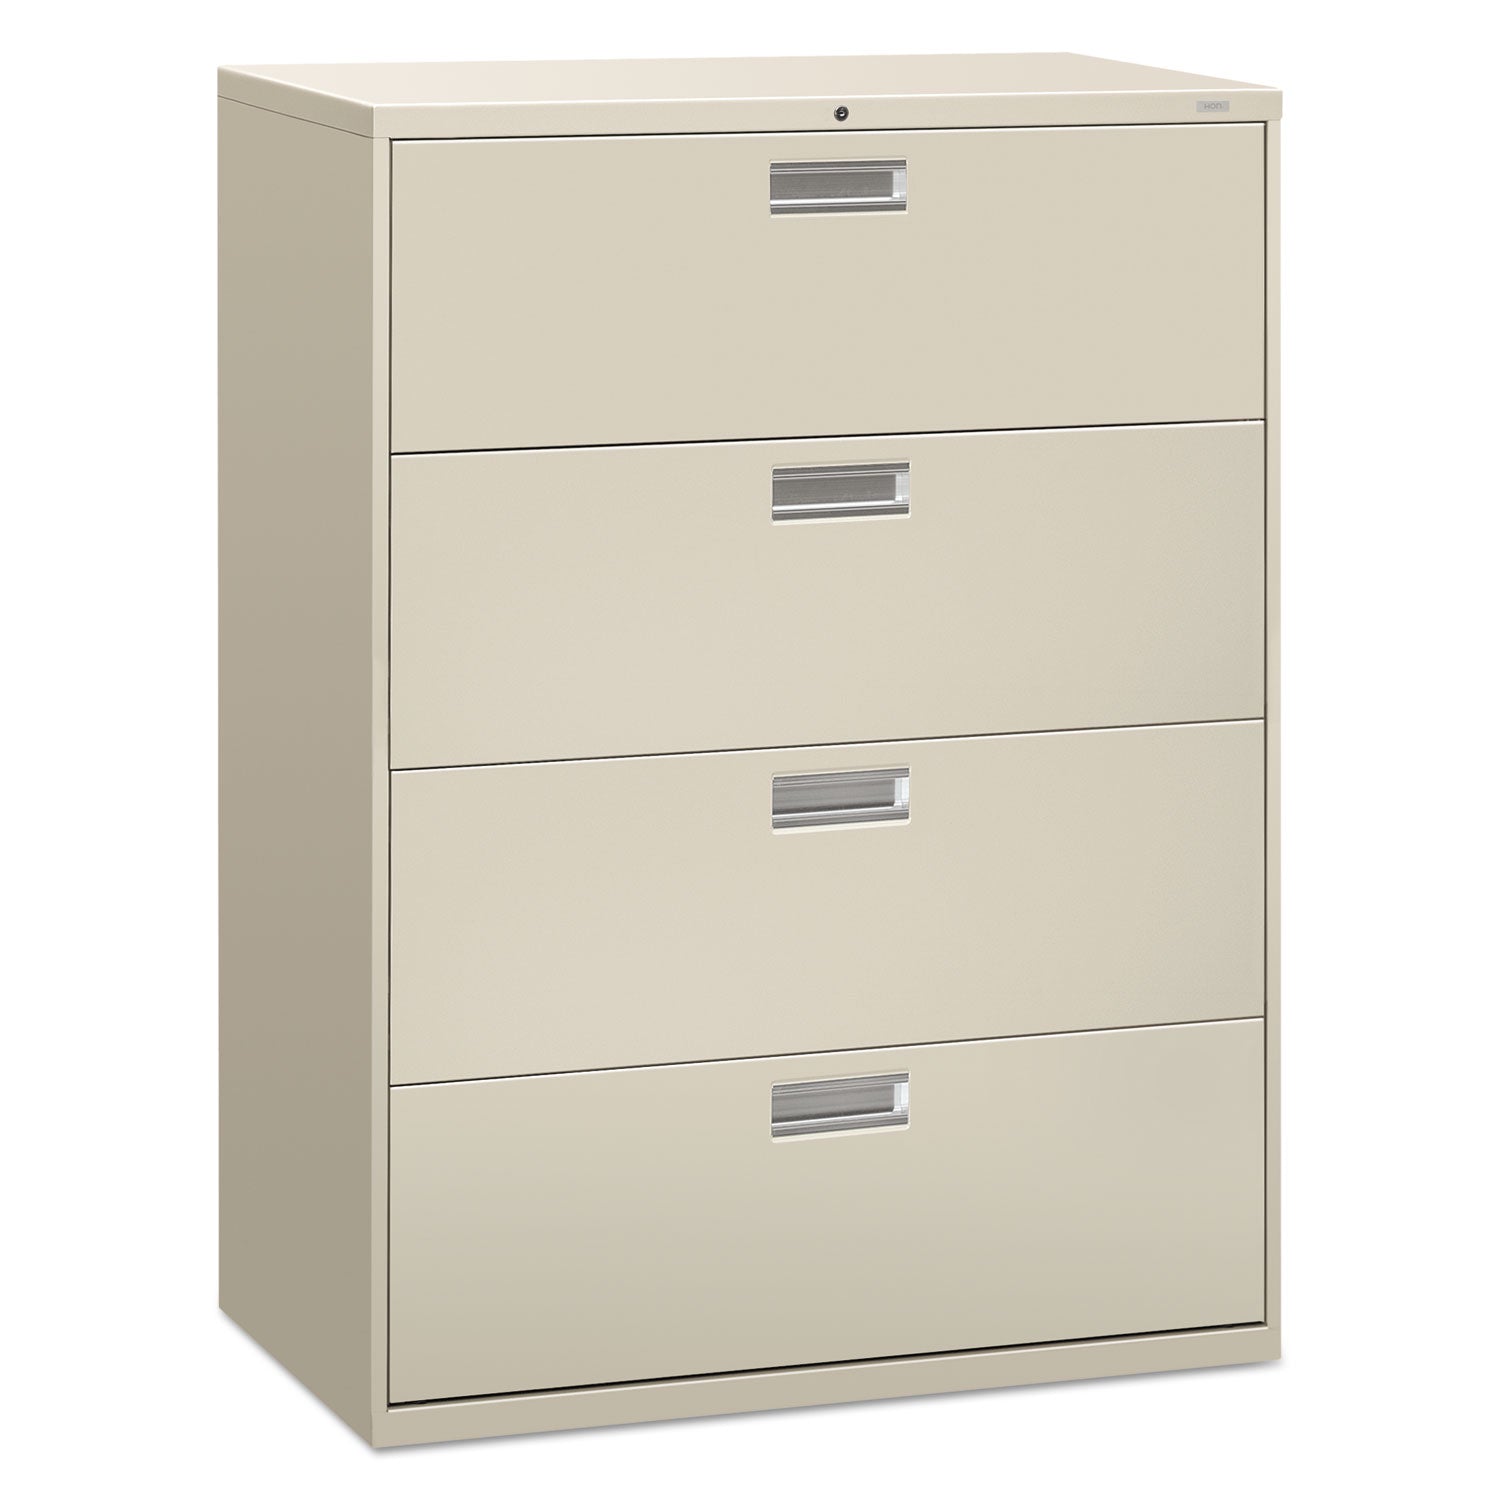 Brigade 600 Series Lateral File, 4 Legal/Letter-Size File Drawers, Light Gray, 42" x 18" x 52.5 - 